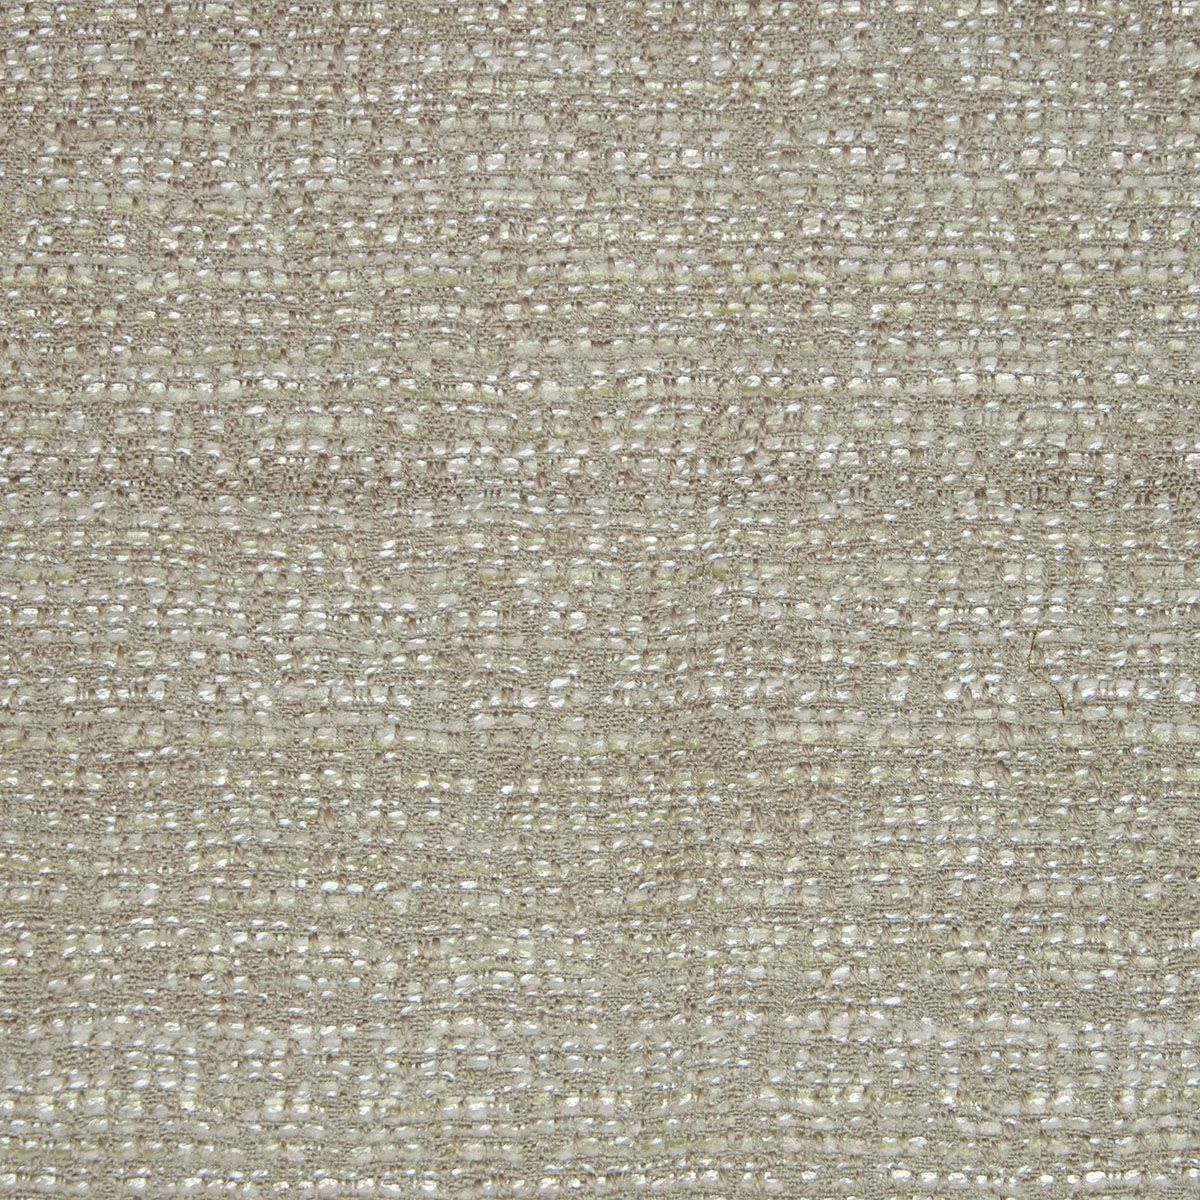 Andes Tweed fabric in dove grey color - pattern number VX 08012638 - by Scalamandre in the Old World Weavers collection